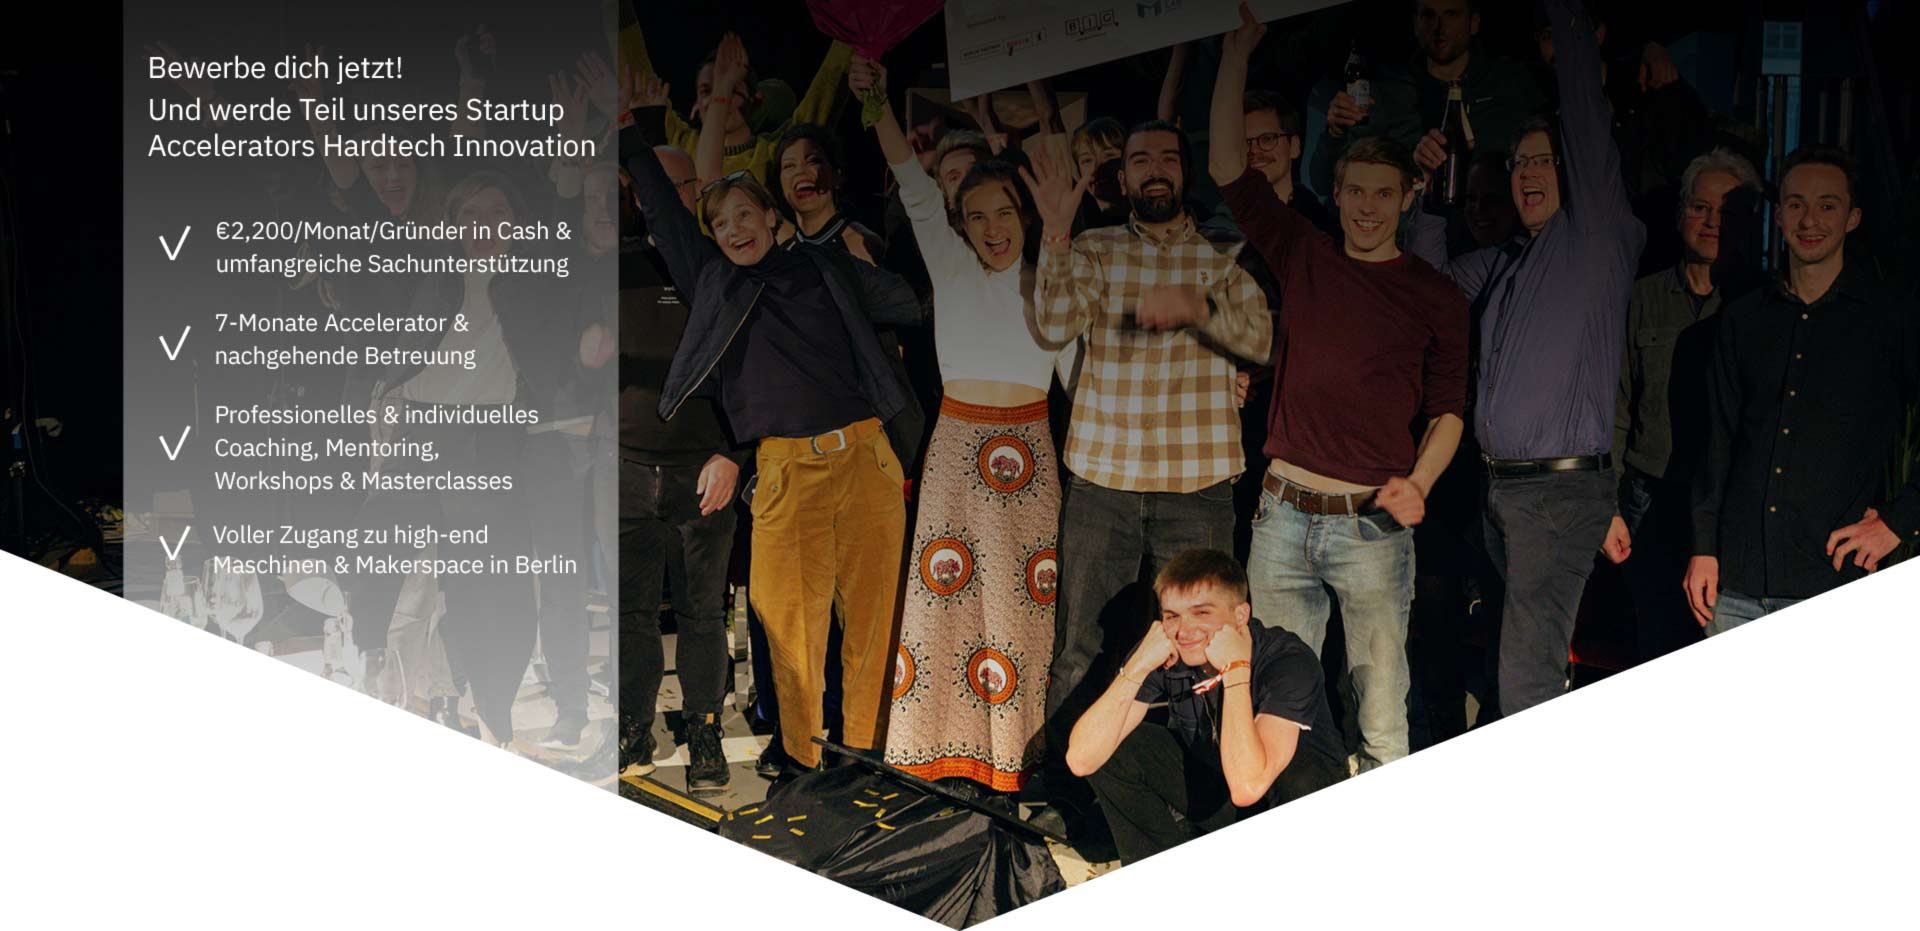 Join the hardtech innovation startup accelerator at MotionLab.Berlin!